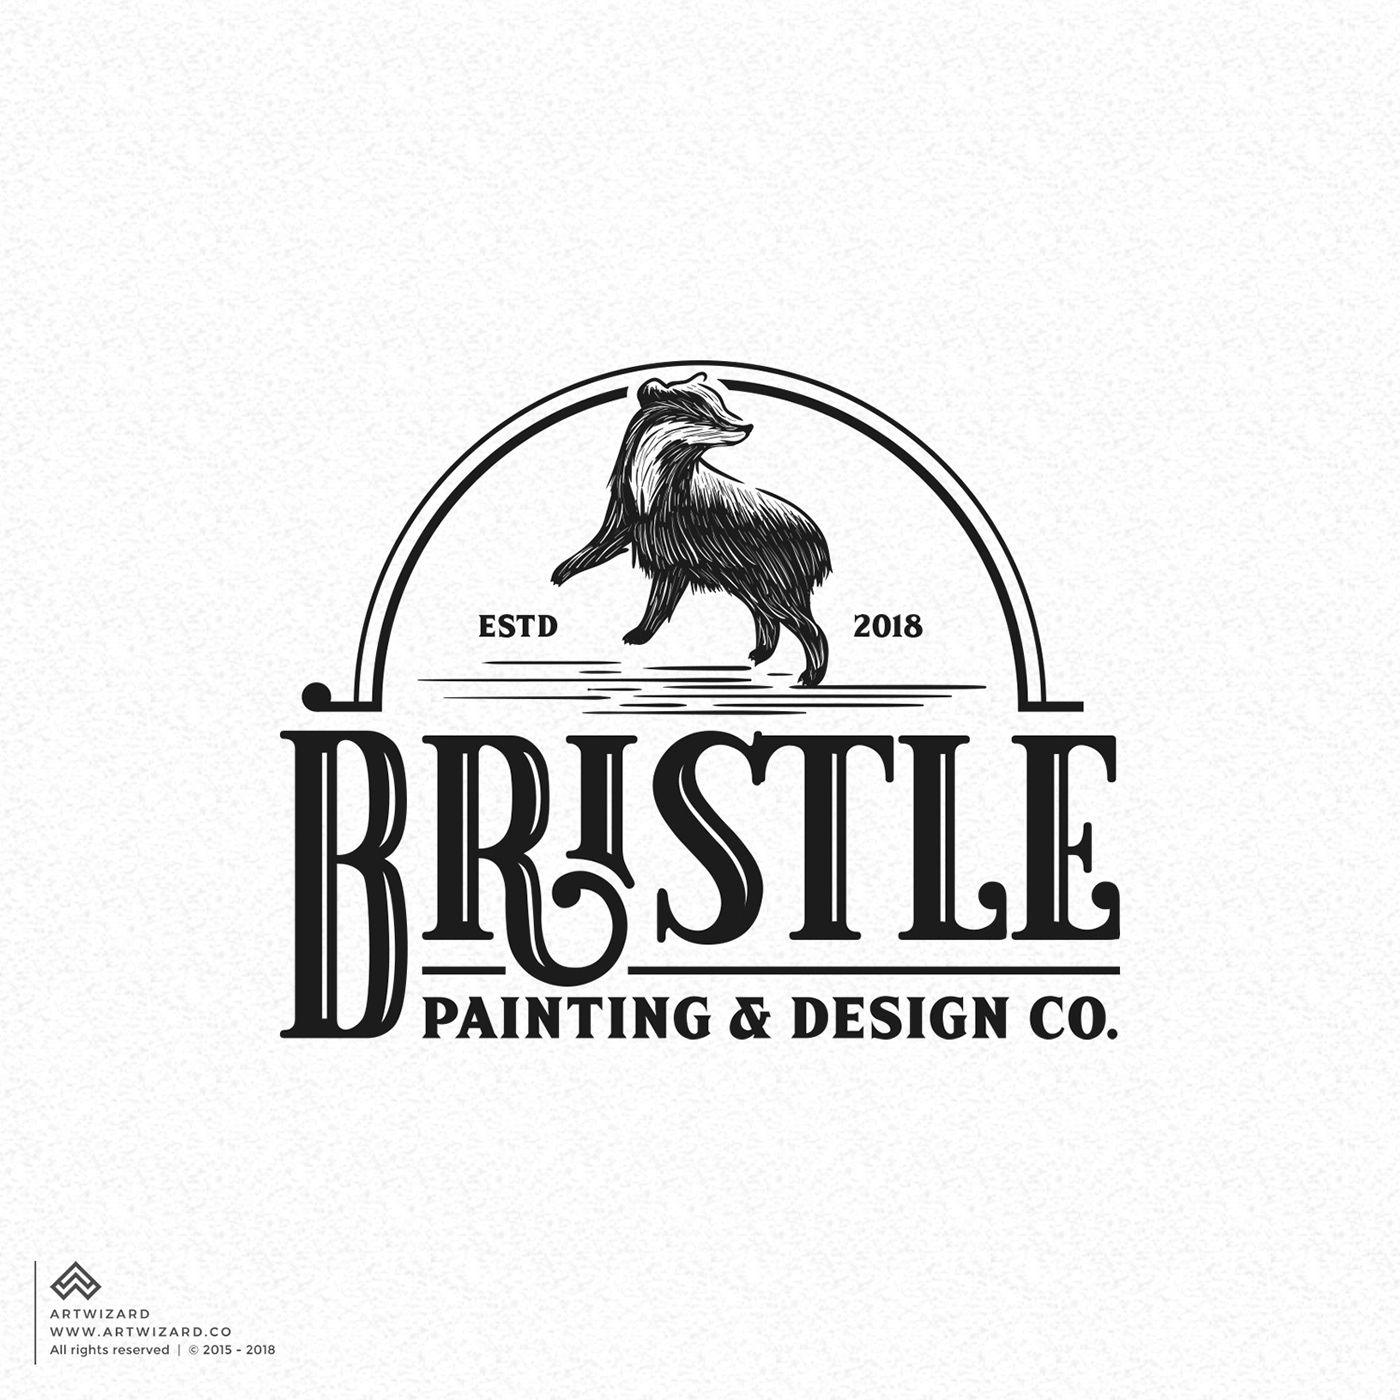 Vintage Painting Logo - Vintage Logo Design Proposal for Painting Company on Behance